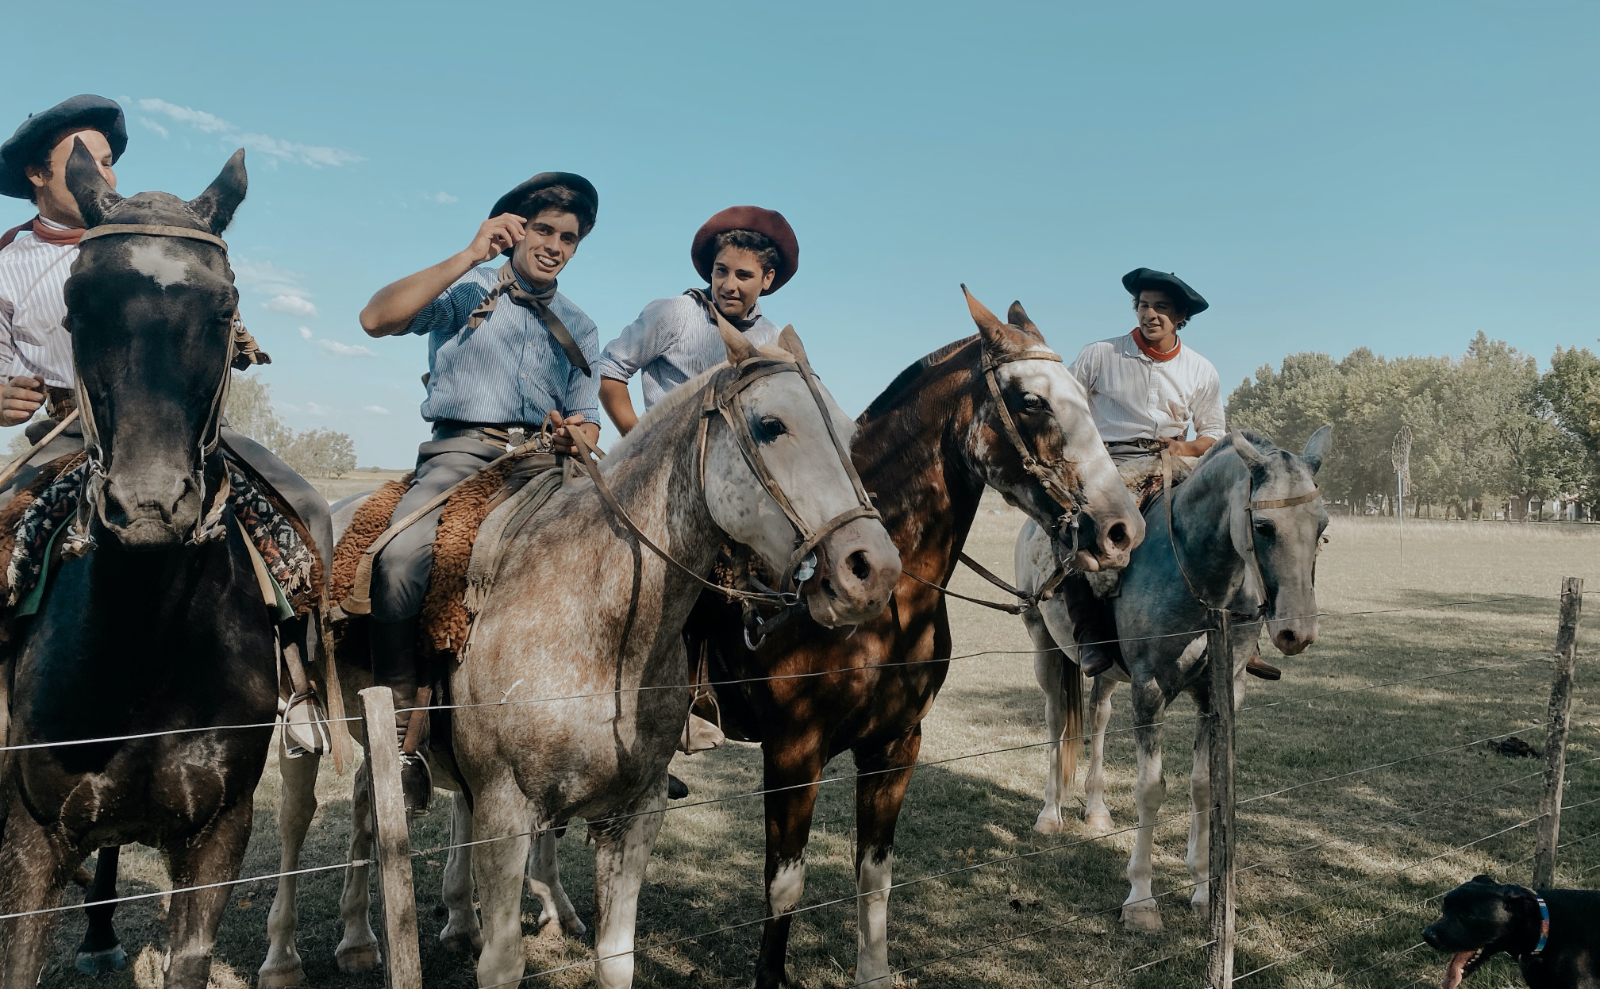 four young men on horses wearing white button shirts with handkerchiefs around their necks and berets